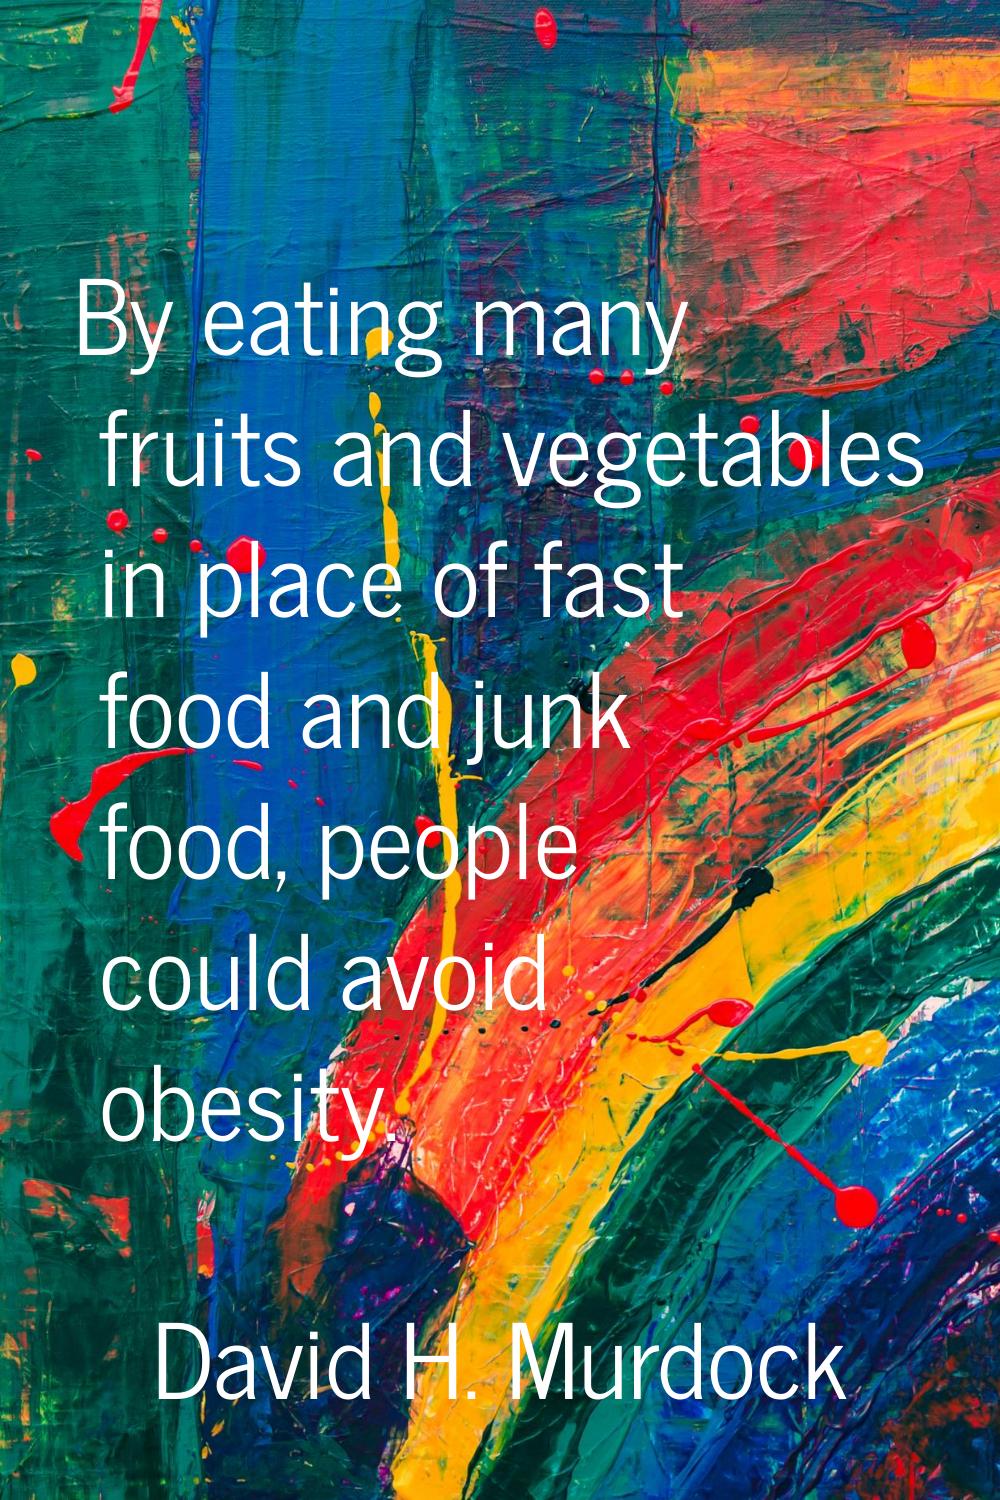 By eating many fruits and vegetables in place of fast food and junk food, people could avoid obesit